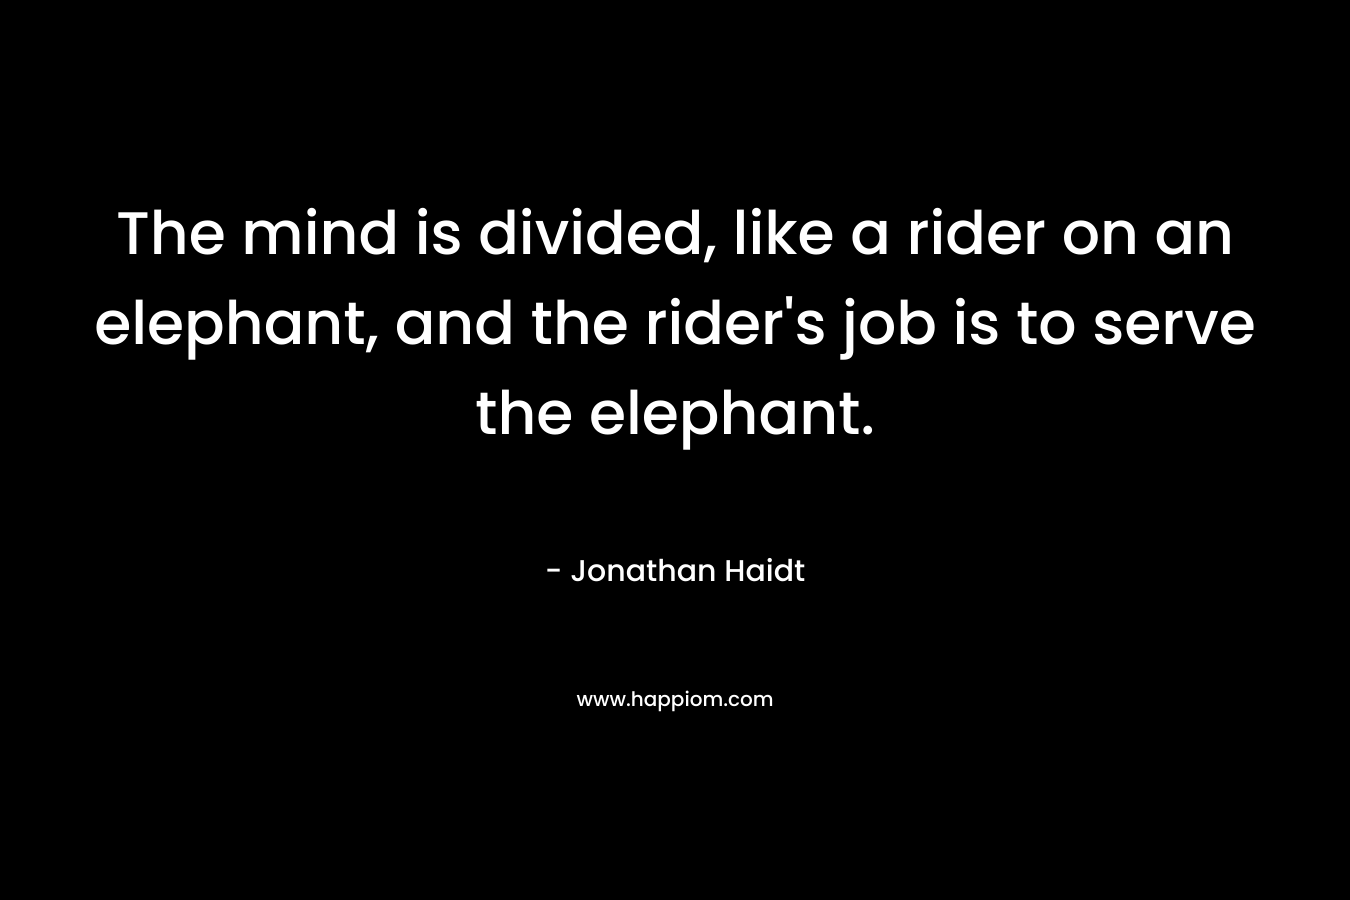 The mind is divided, like a rider on an elephant, and the rider’s job is to serve the elephant. – Jonathan Haidt